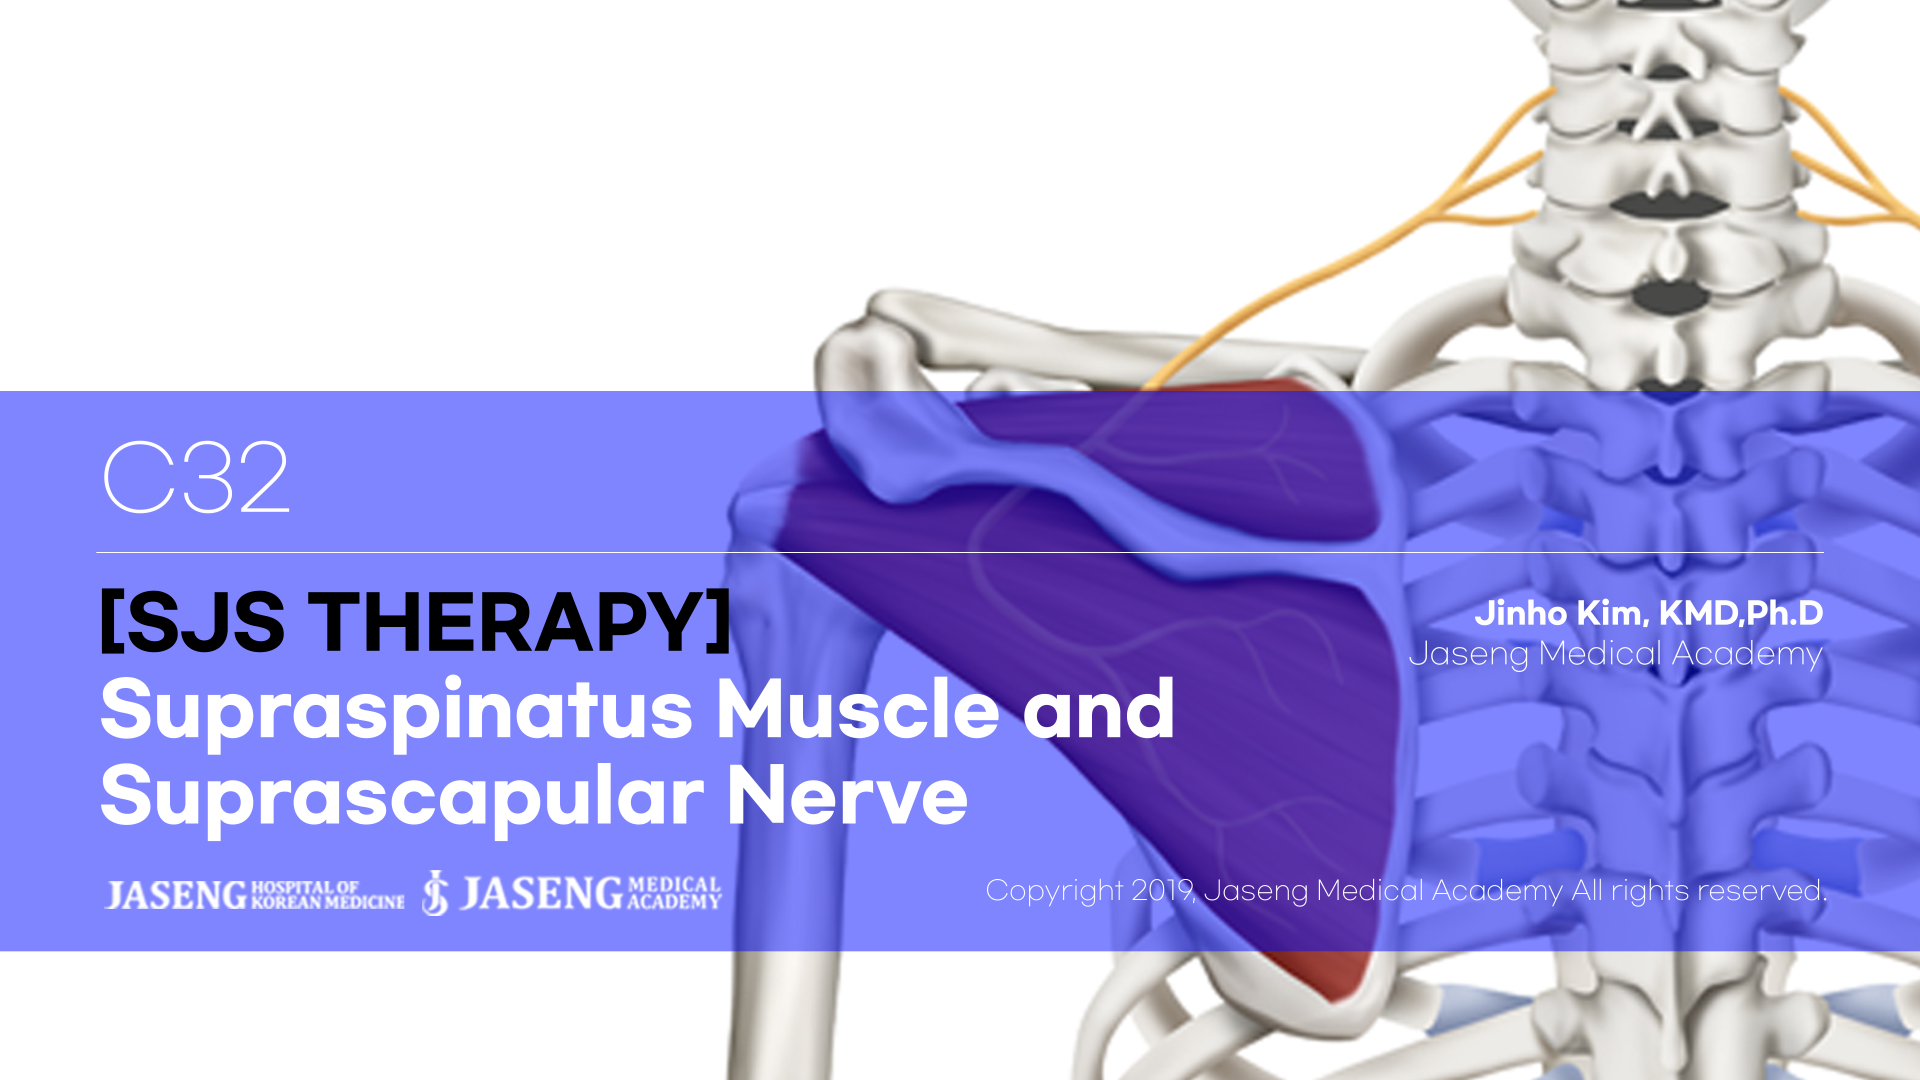 [SJS THERAPY] Supraspinatus Muscle and Suprascapular Nerve